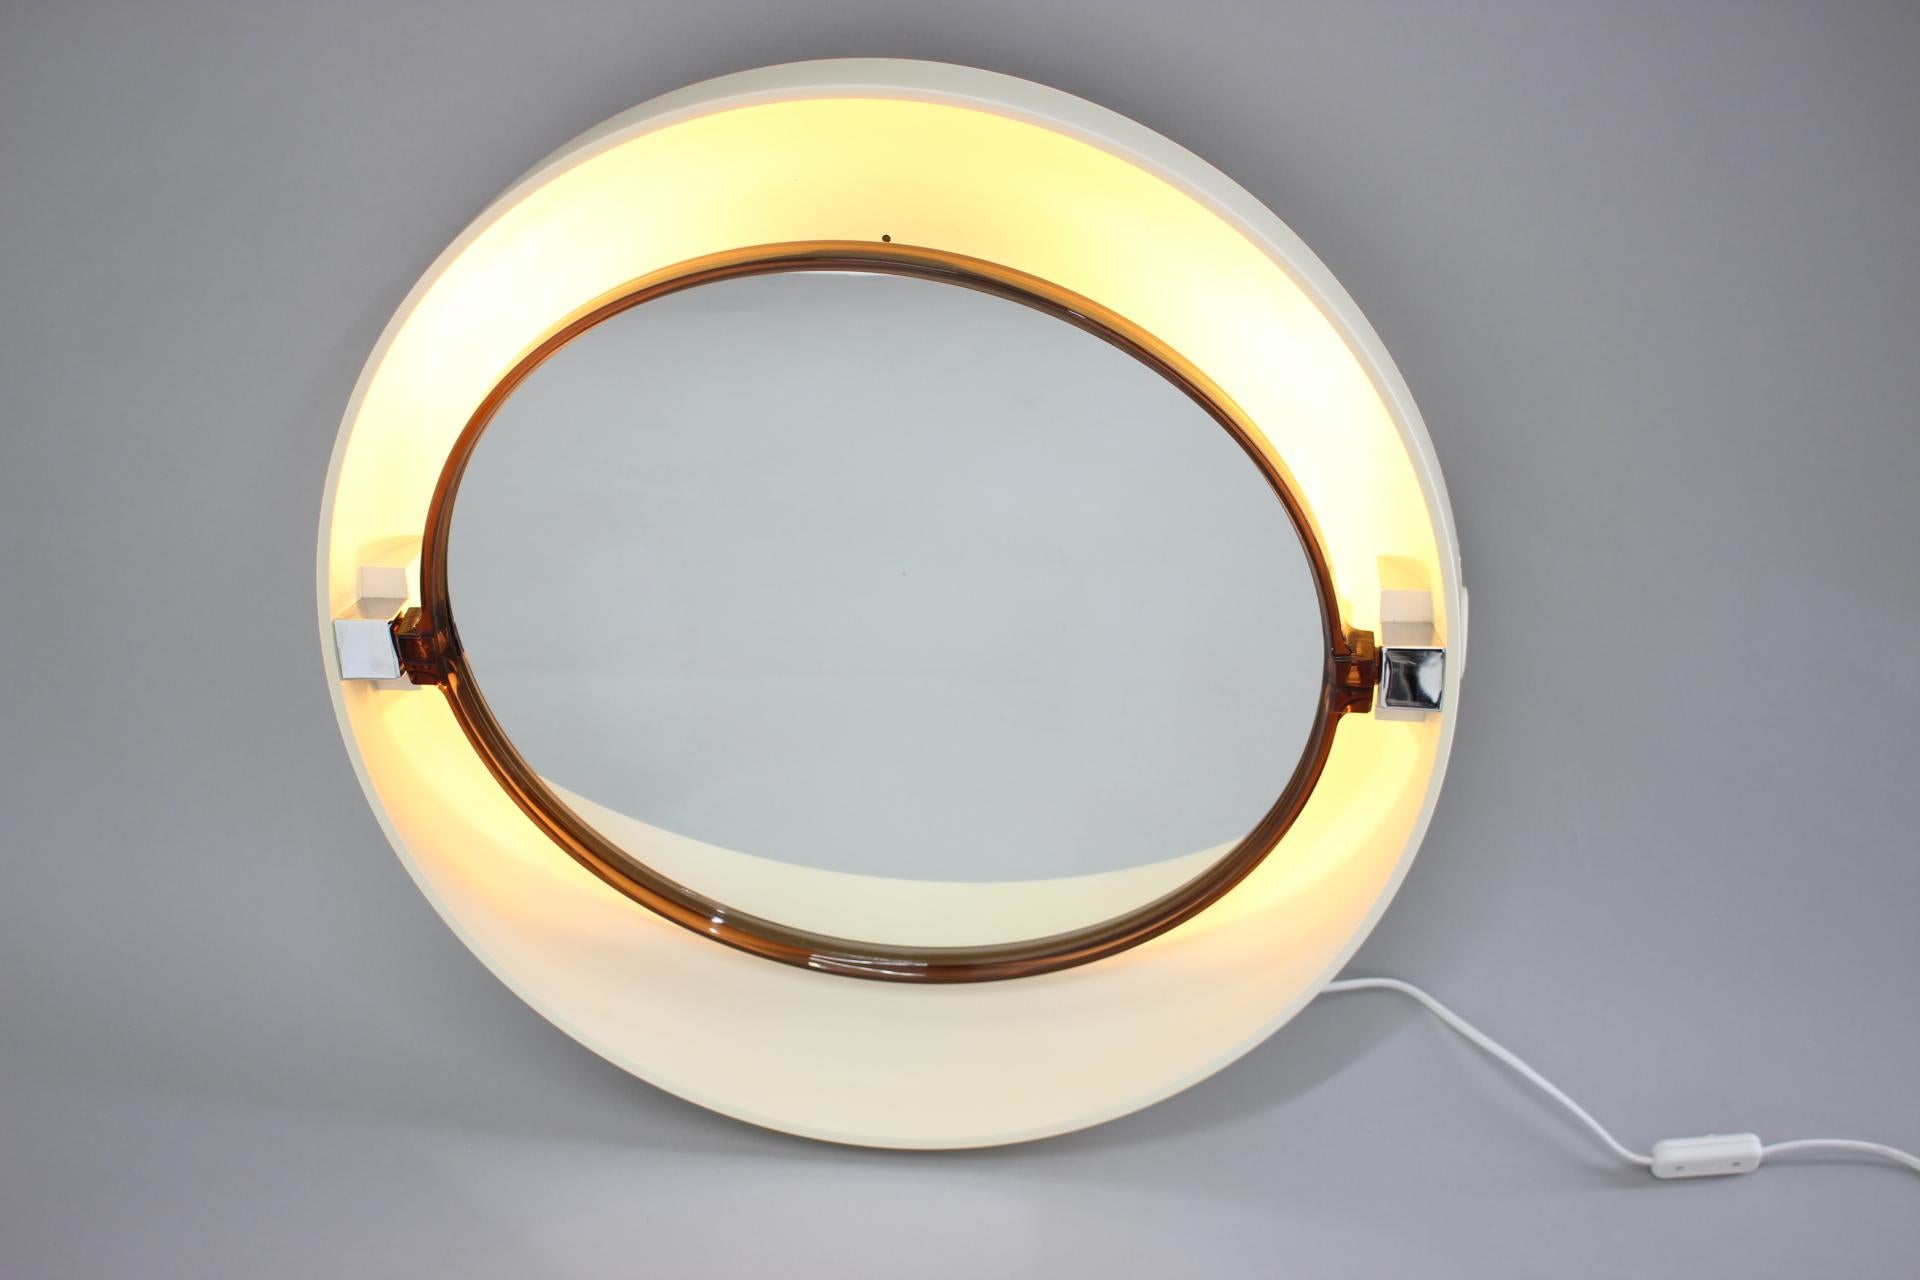 Large Midcentury Backlit Mirror Allibert, Italy, 1970s For Sale 8